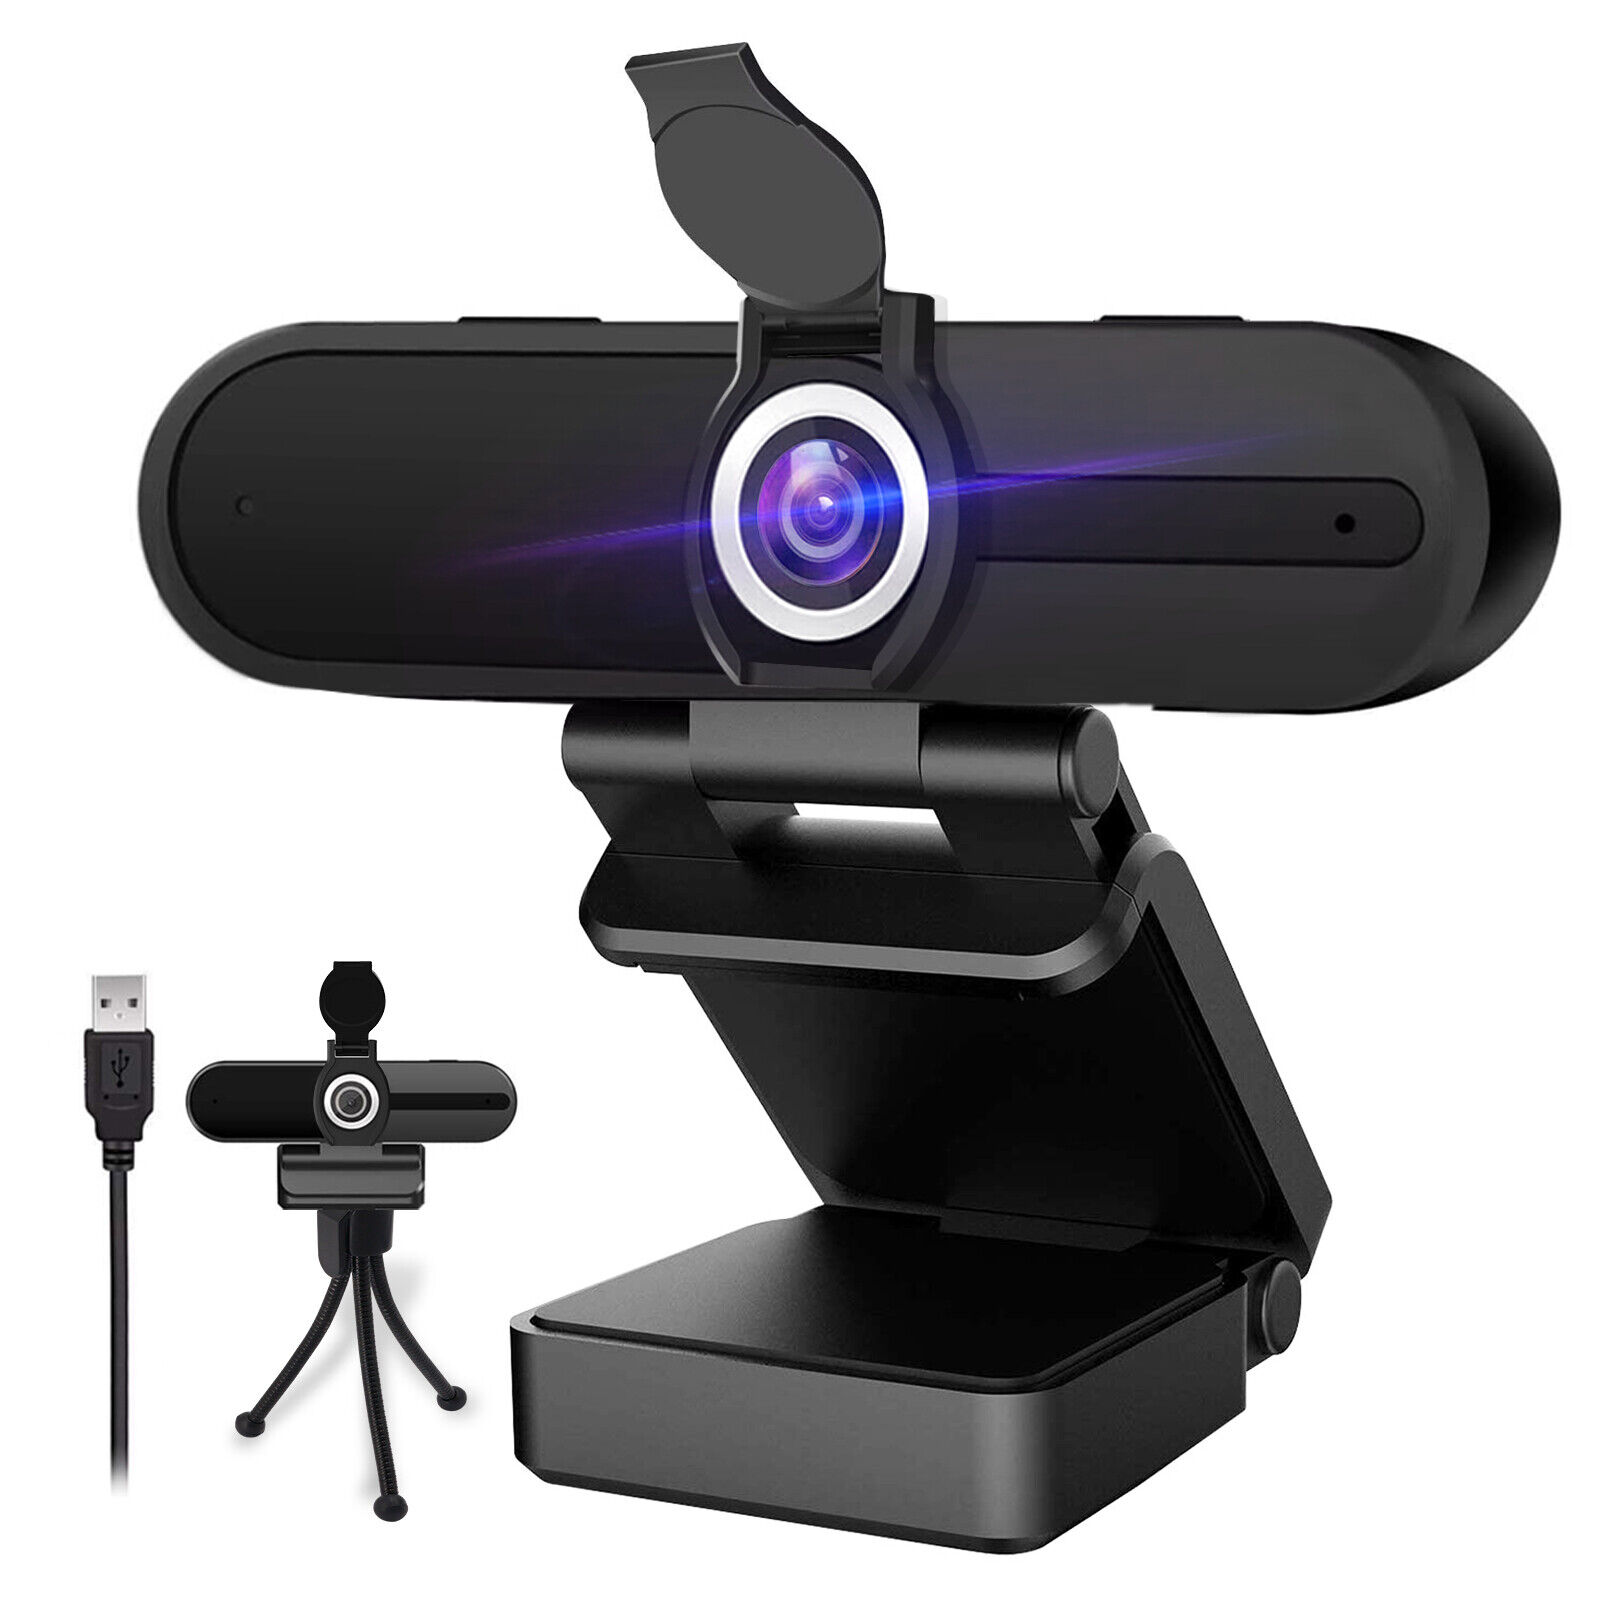 4K Ultra HD USB Webcam, Pro Streaming Web Camera with Microphone & Privacy Cover